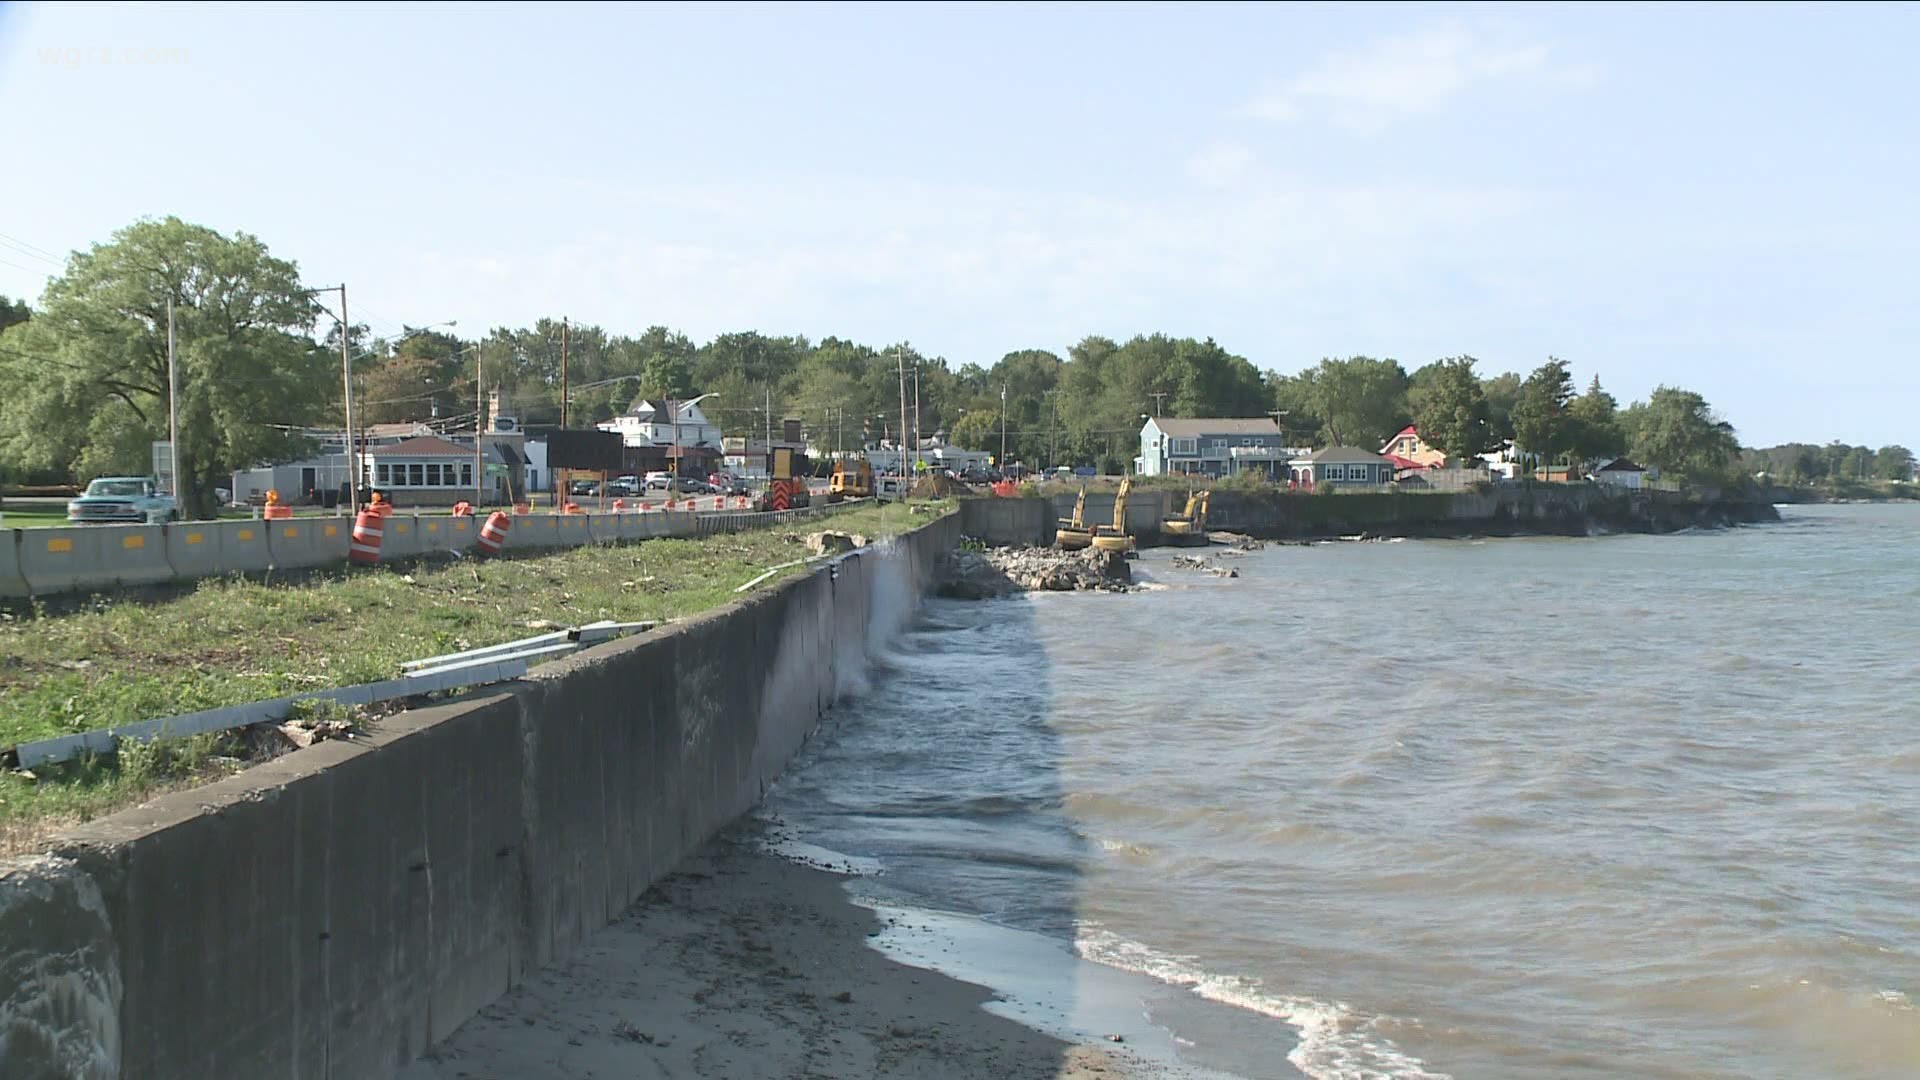 The new structure will provide protection to Route 5 from Lake Erie waves.